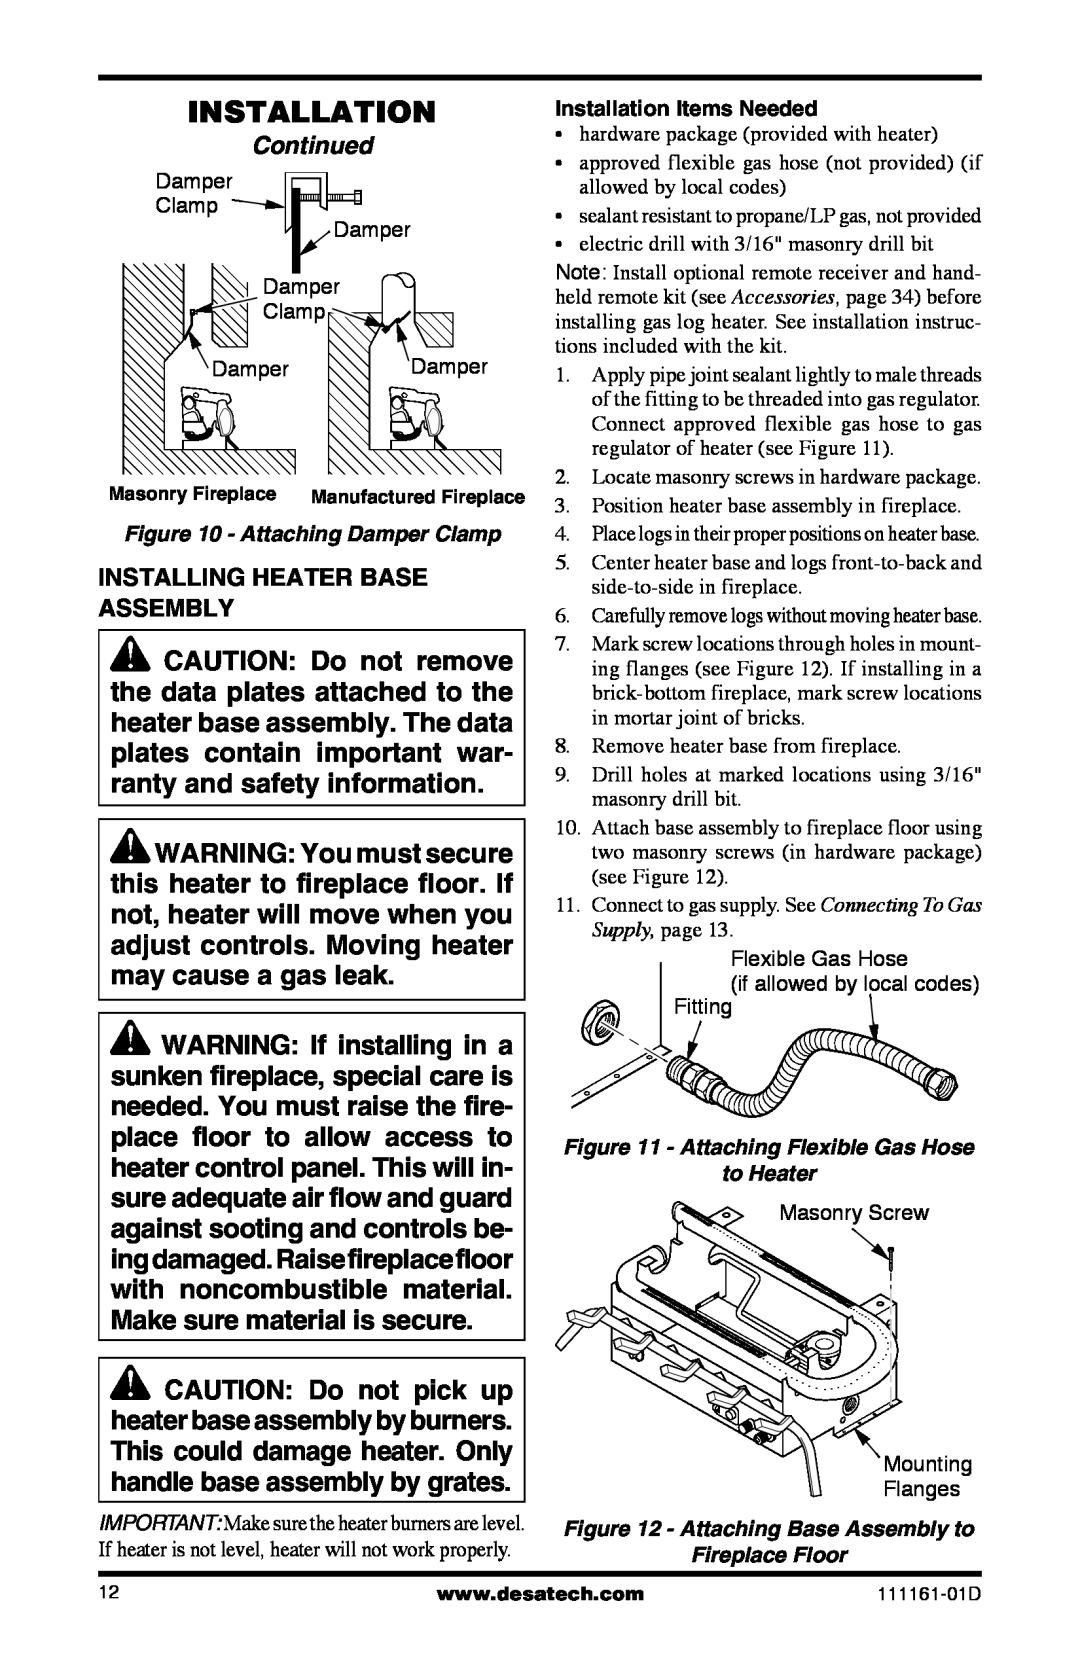 Desa Tech CCL3930PRA, CCL3018NR installation manual Continued, Installing Heater Base Assembly 